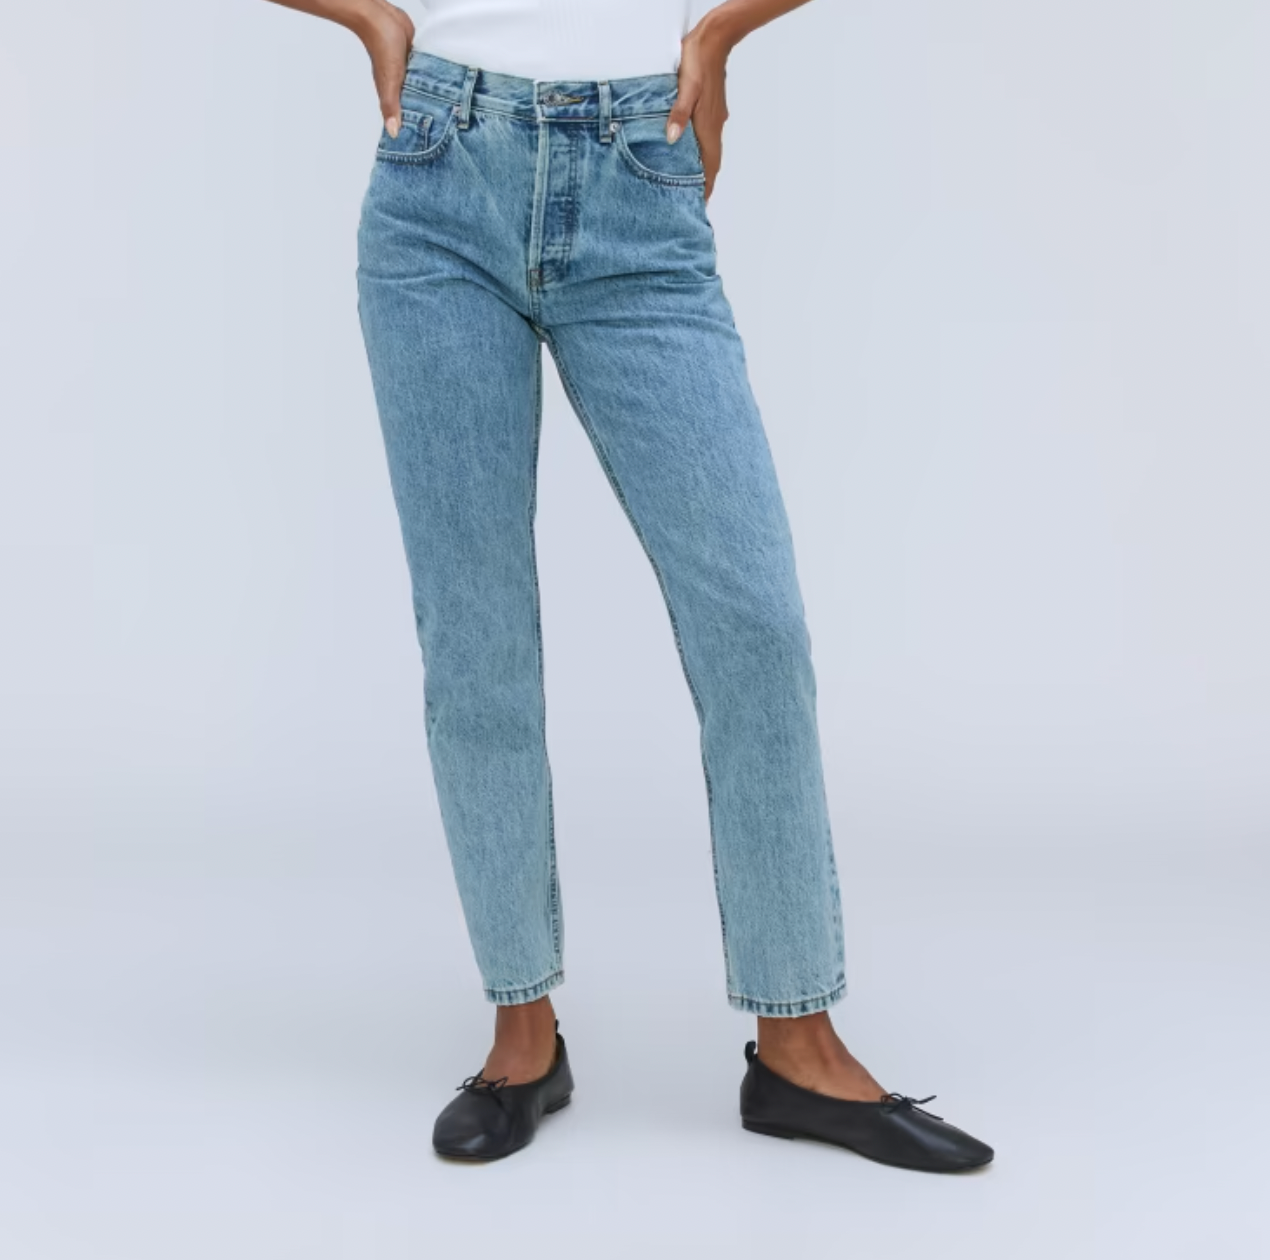 What is the waist size on a size 14 pair of jeans? - Quora